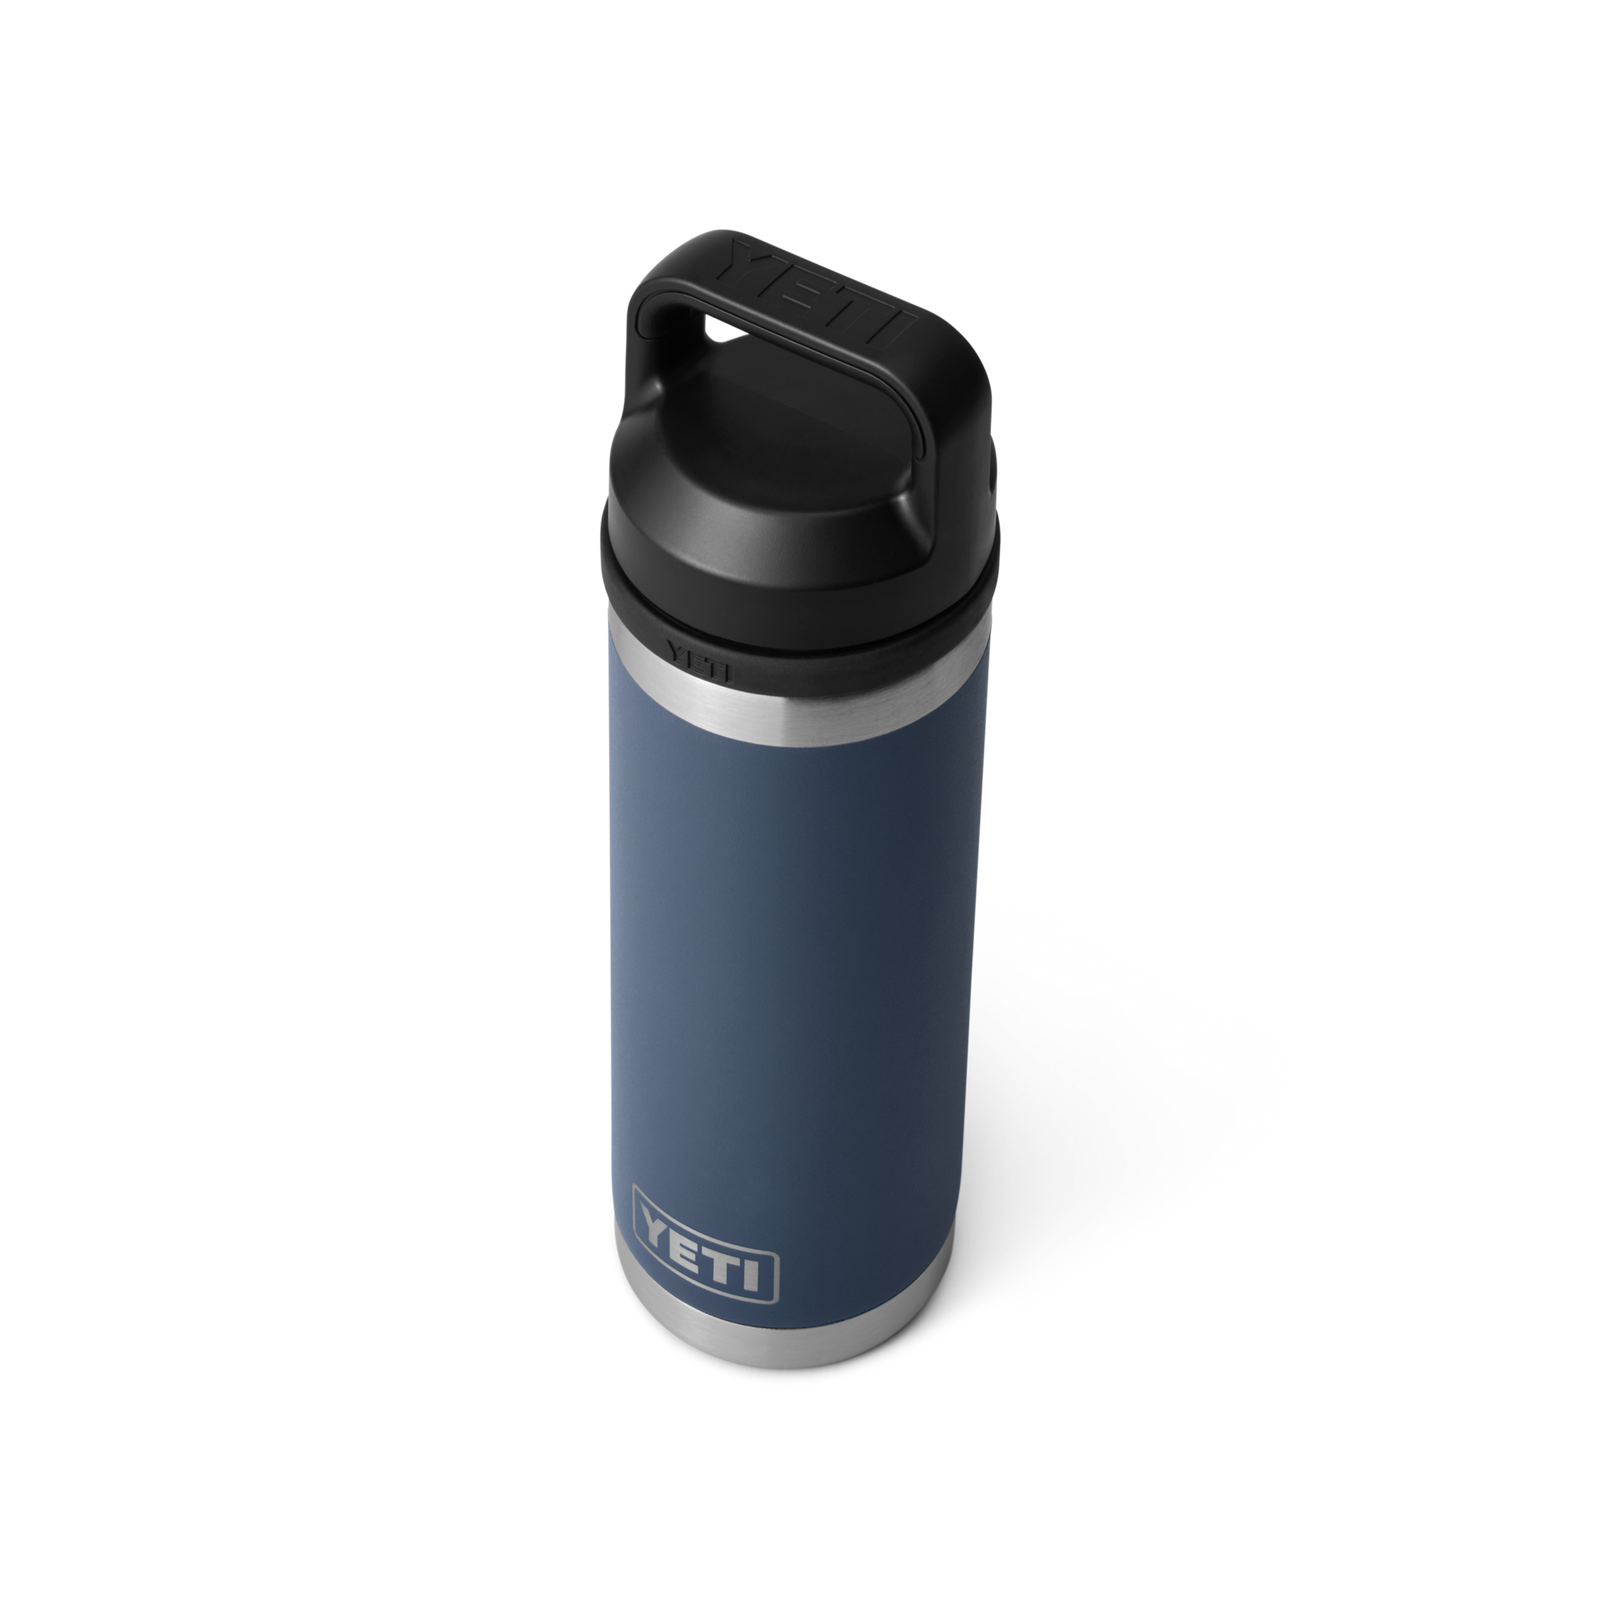 YETI Rambler Bottle with Chug Cap Review – The Cheshire Horse